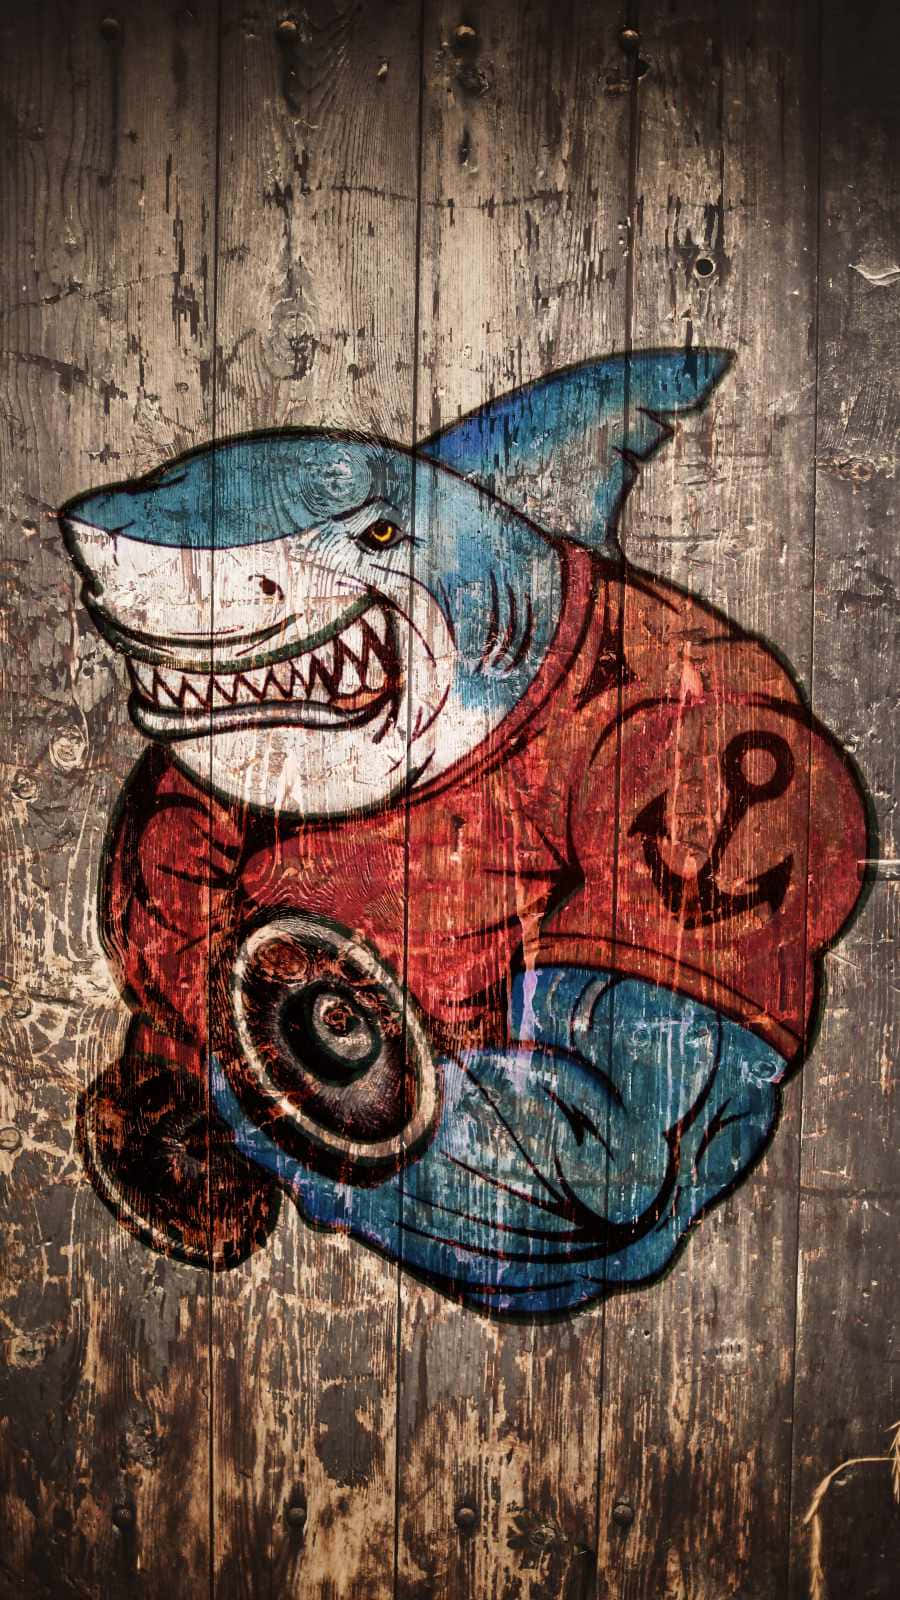 Get The Latest Range Of iPhones With The Shark Look! Wallpaper